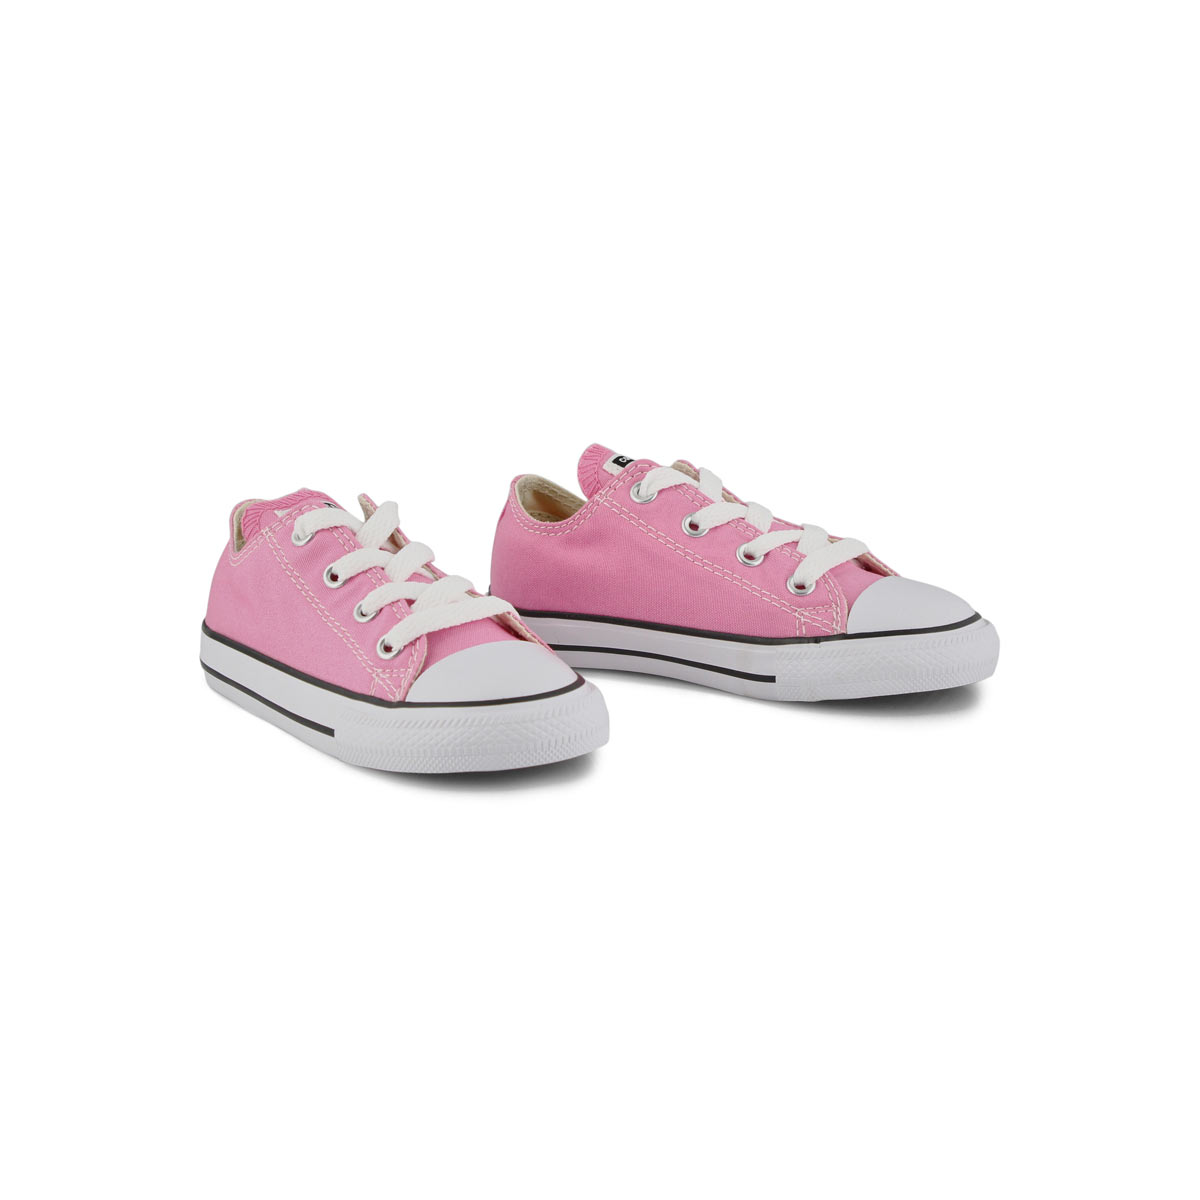 Infants' Chuck Taylor All Star Sneaker -Pink